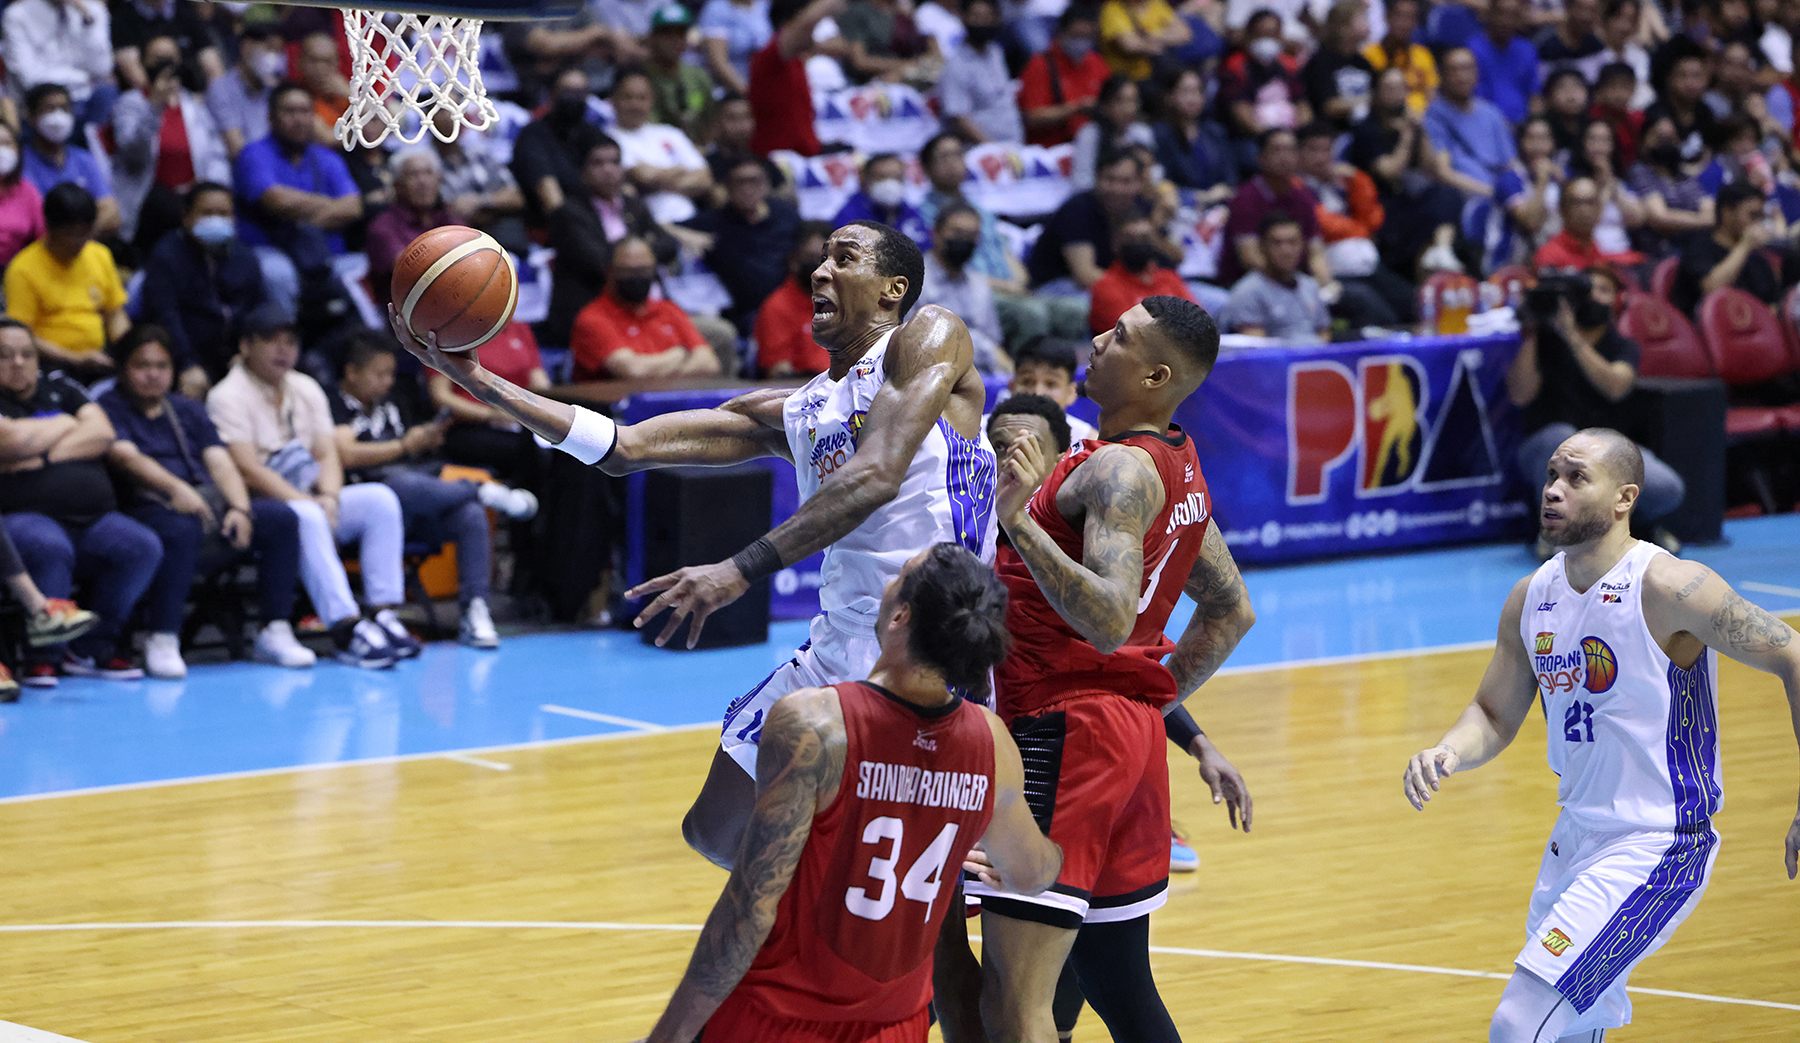 TNT downs Ginebra, moves a win away from PBA title